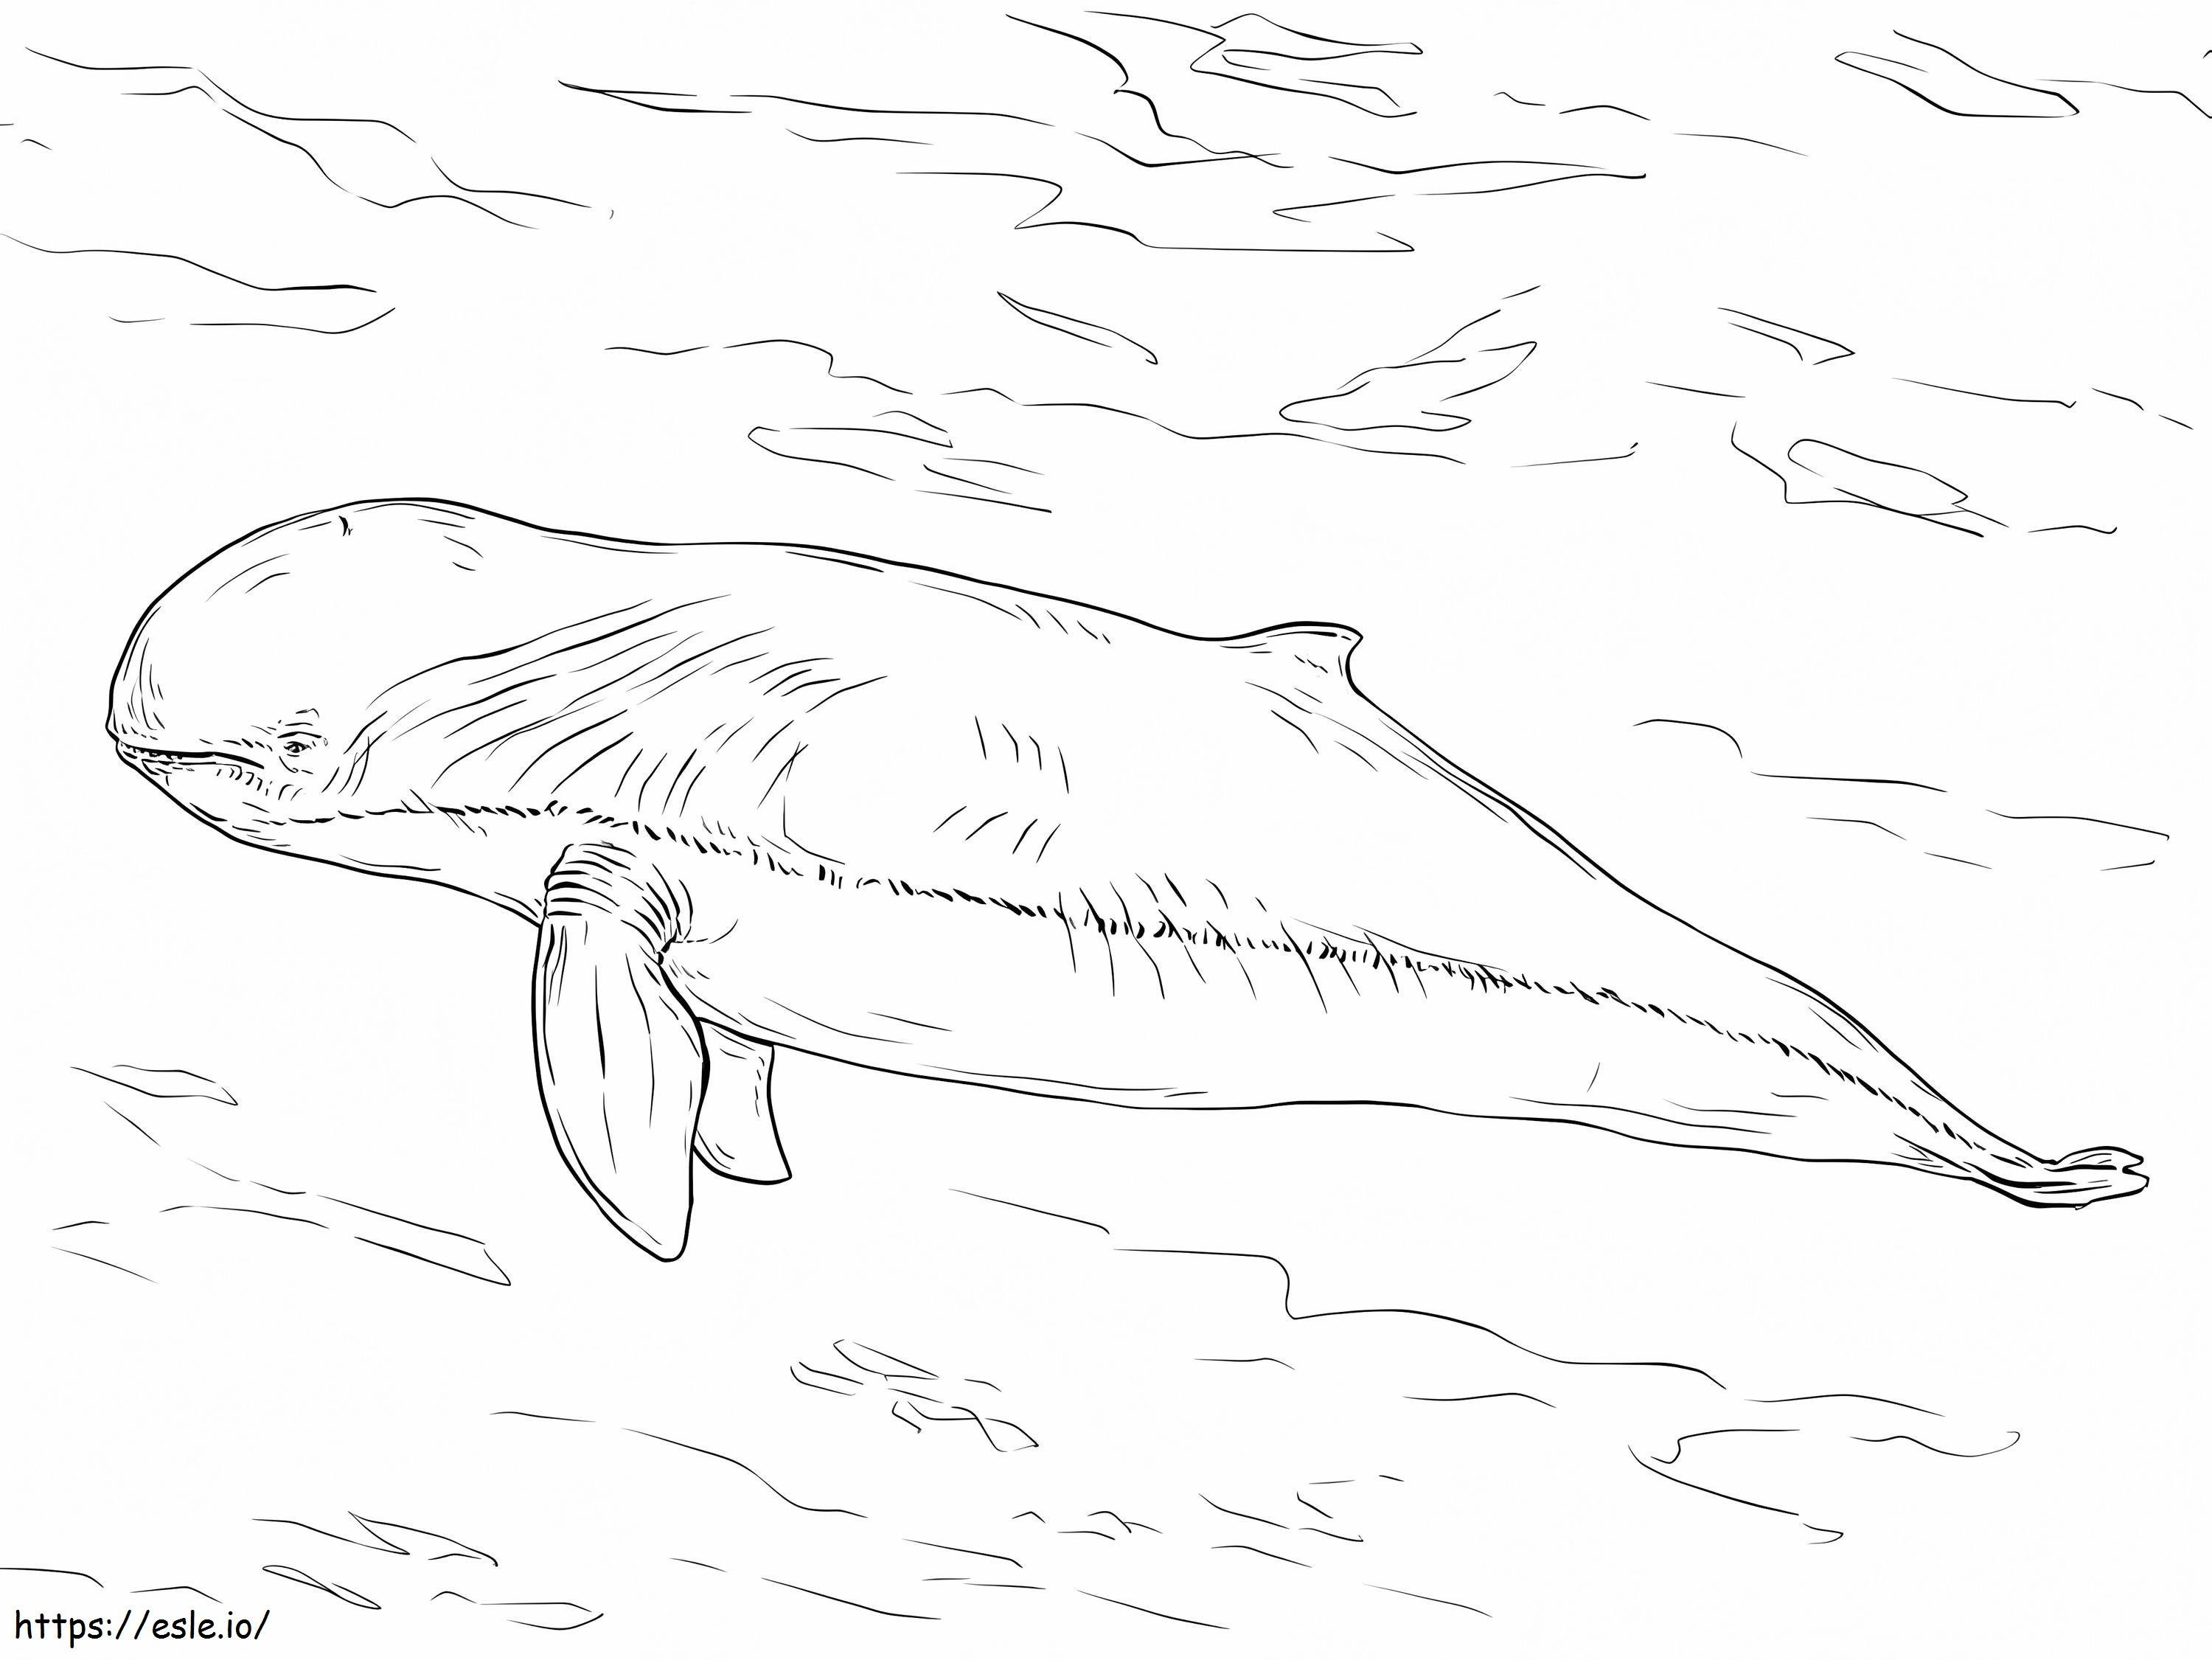 Irrawaddy Dolphin coloring page